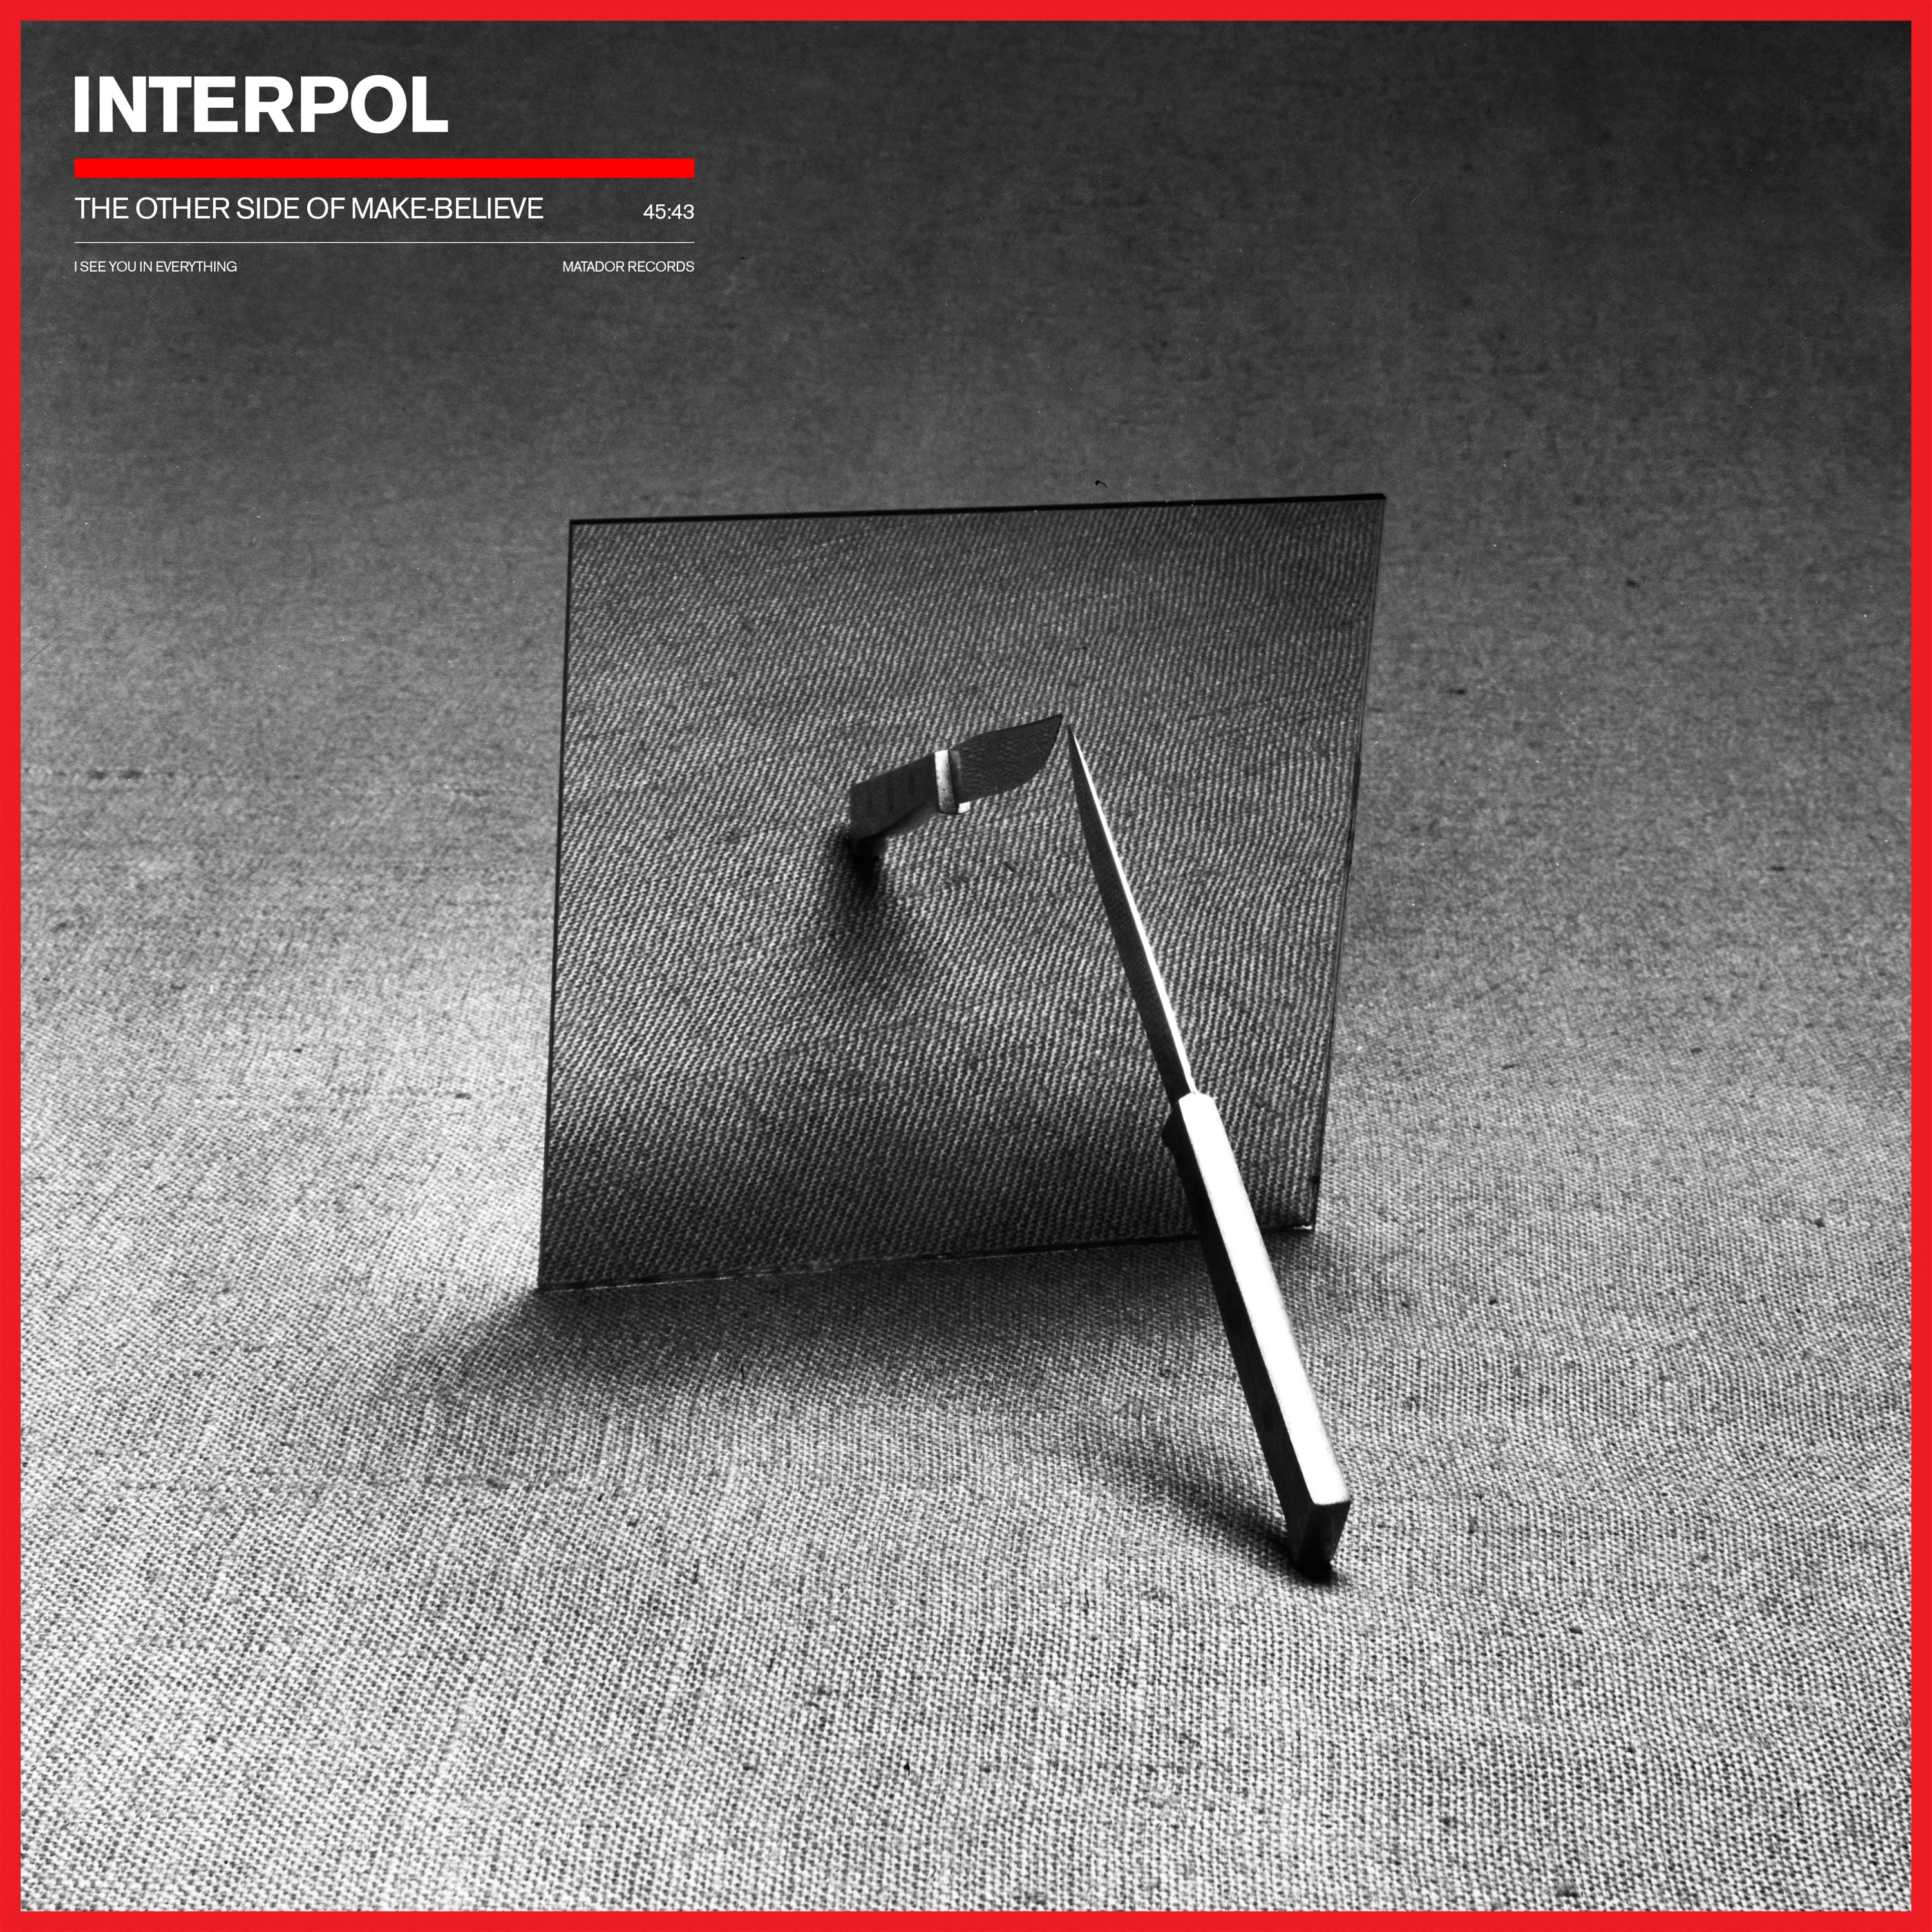 Interpol - The Other Side Of Make-Believe - CD